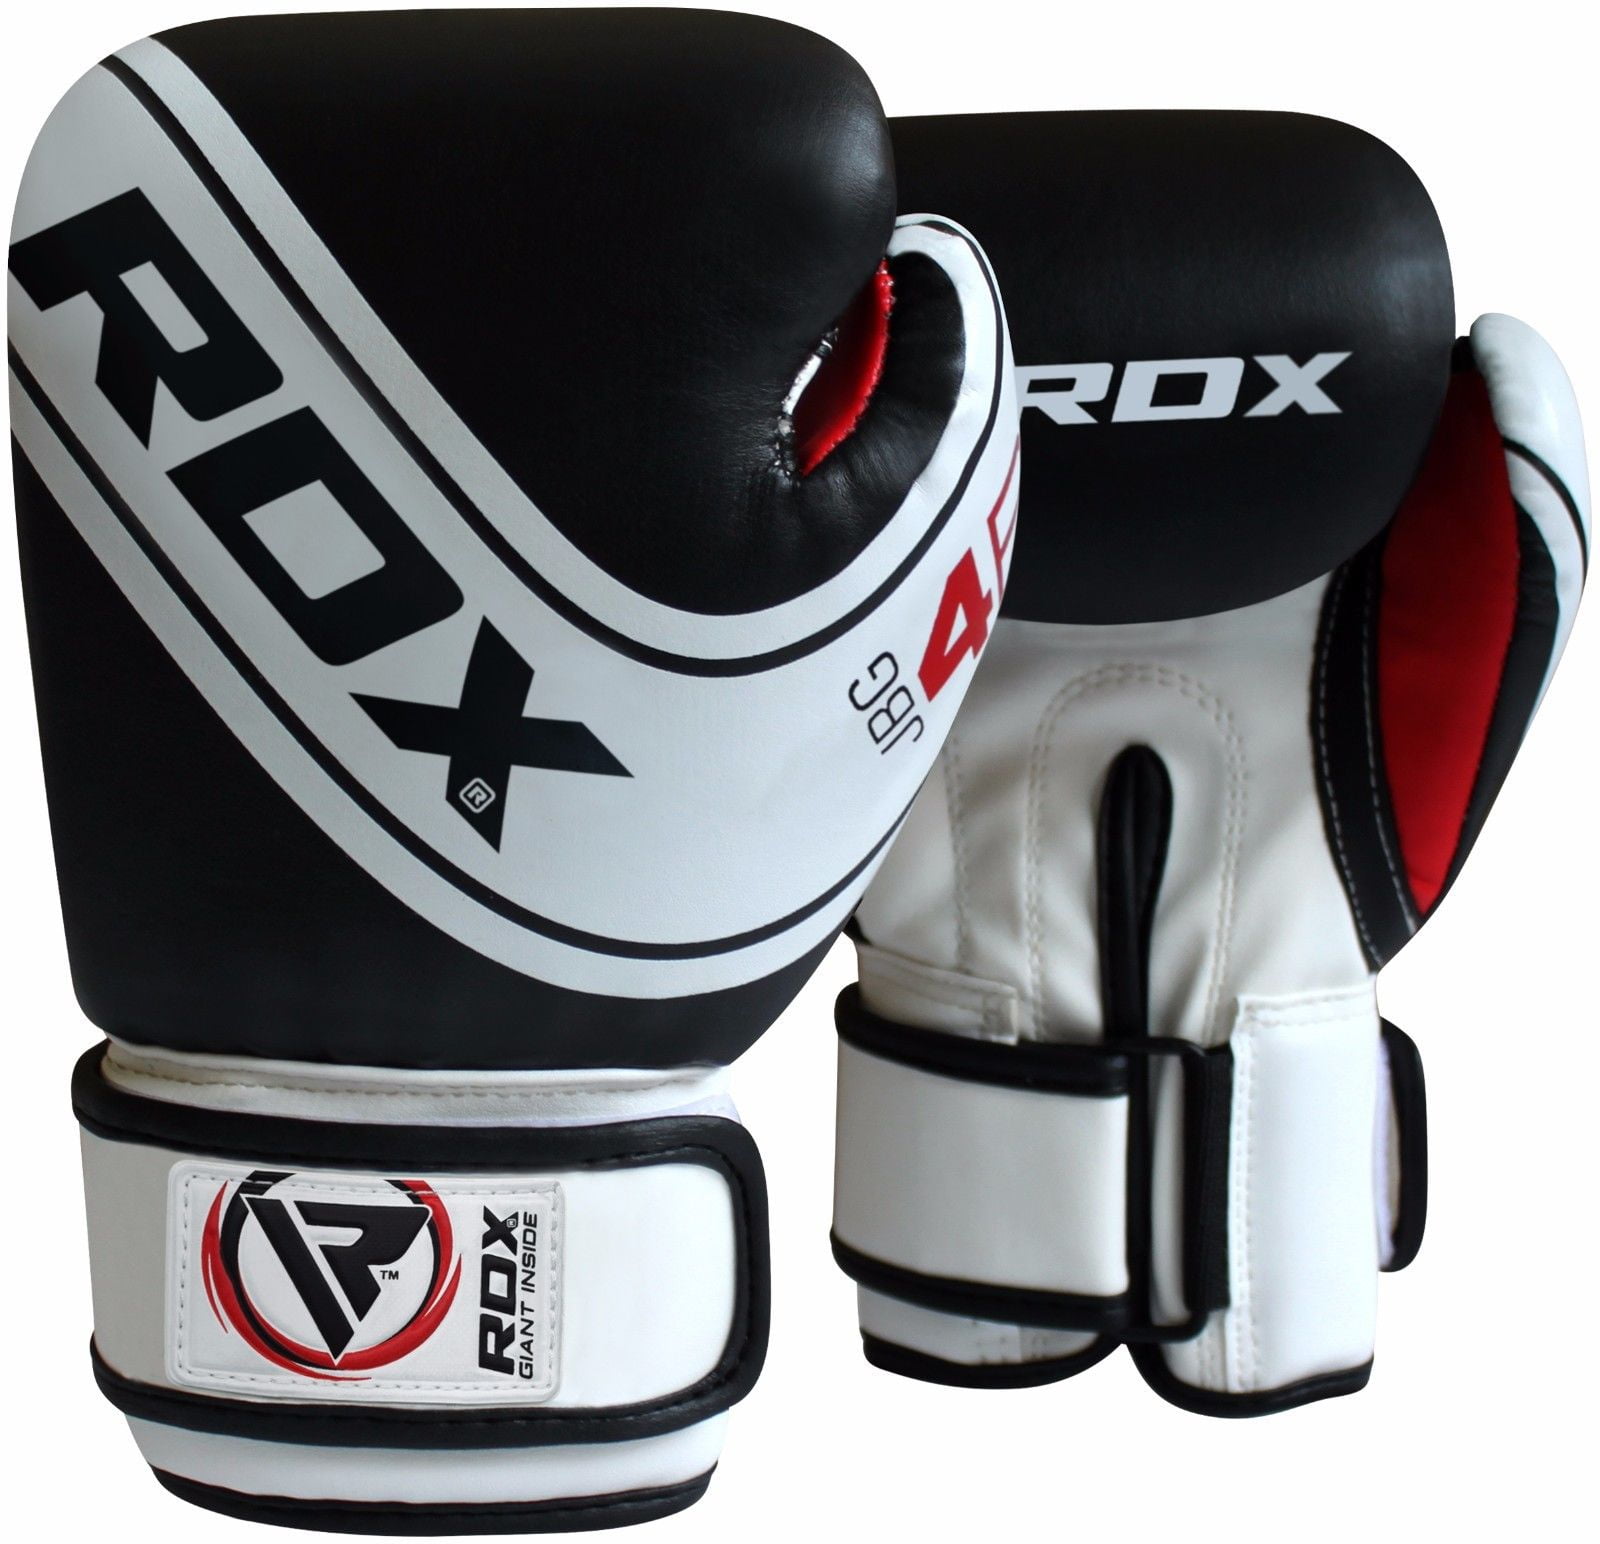 Junior Kids Boxing Gloves Training Sparring Focus Pad Fighting & Punching Gloves 